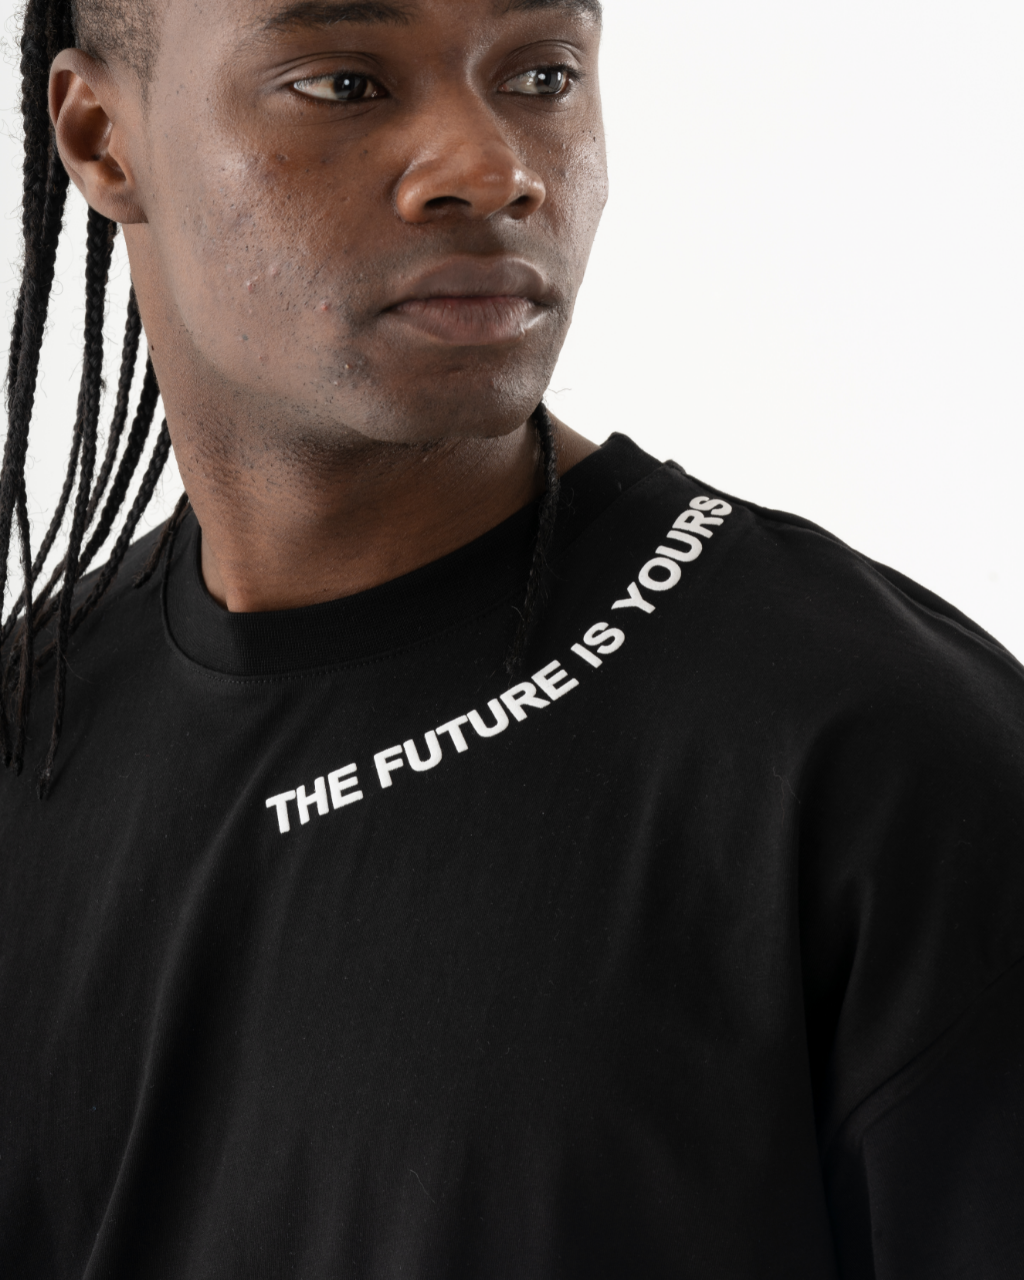 The future is your comfortable TURRET T-SHIRT.